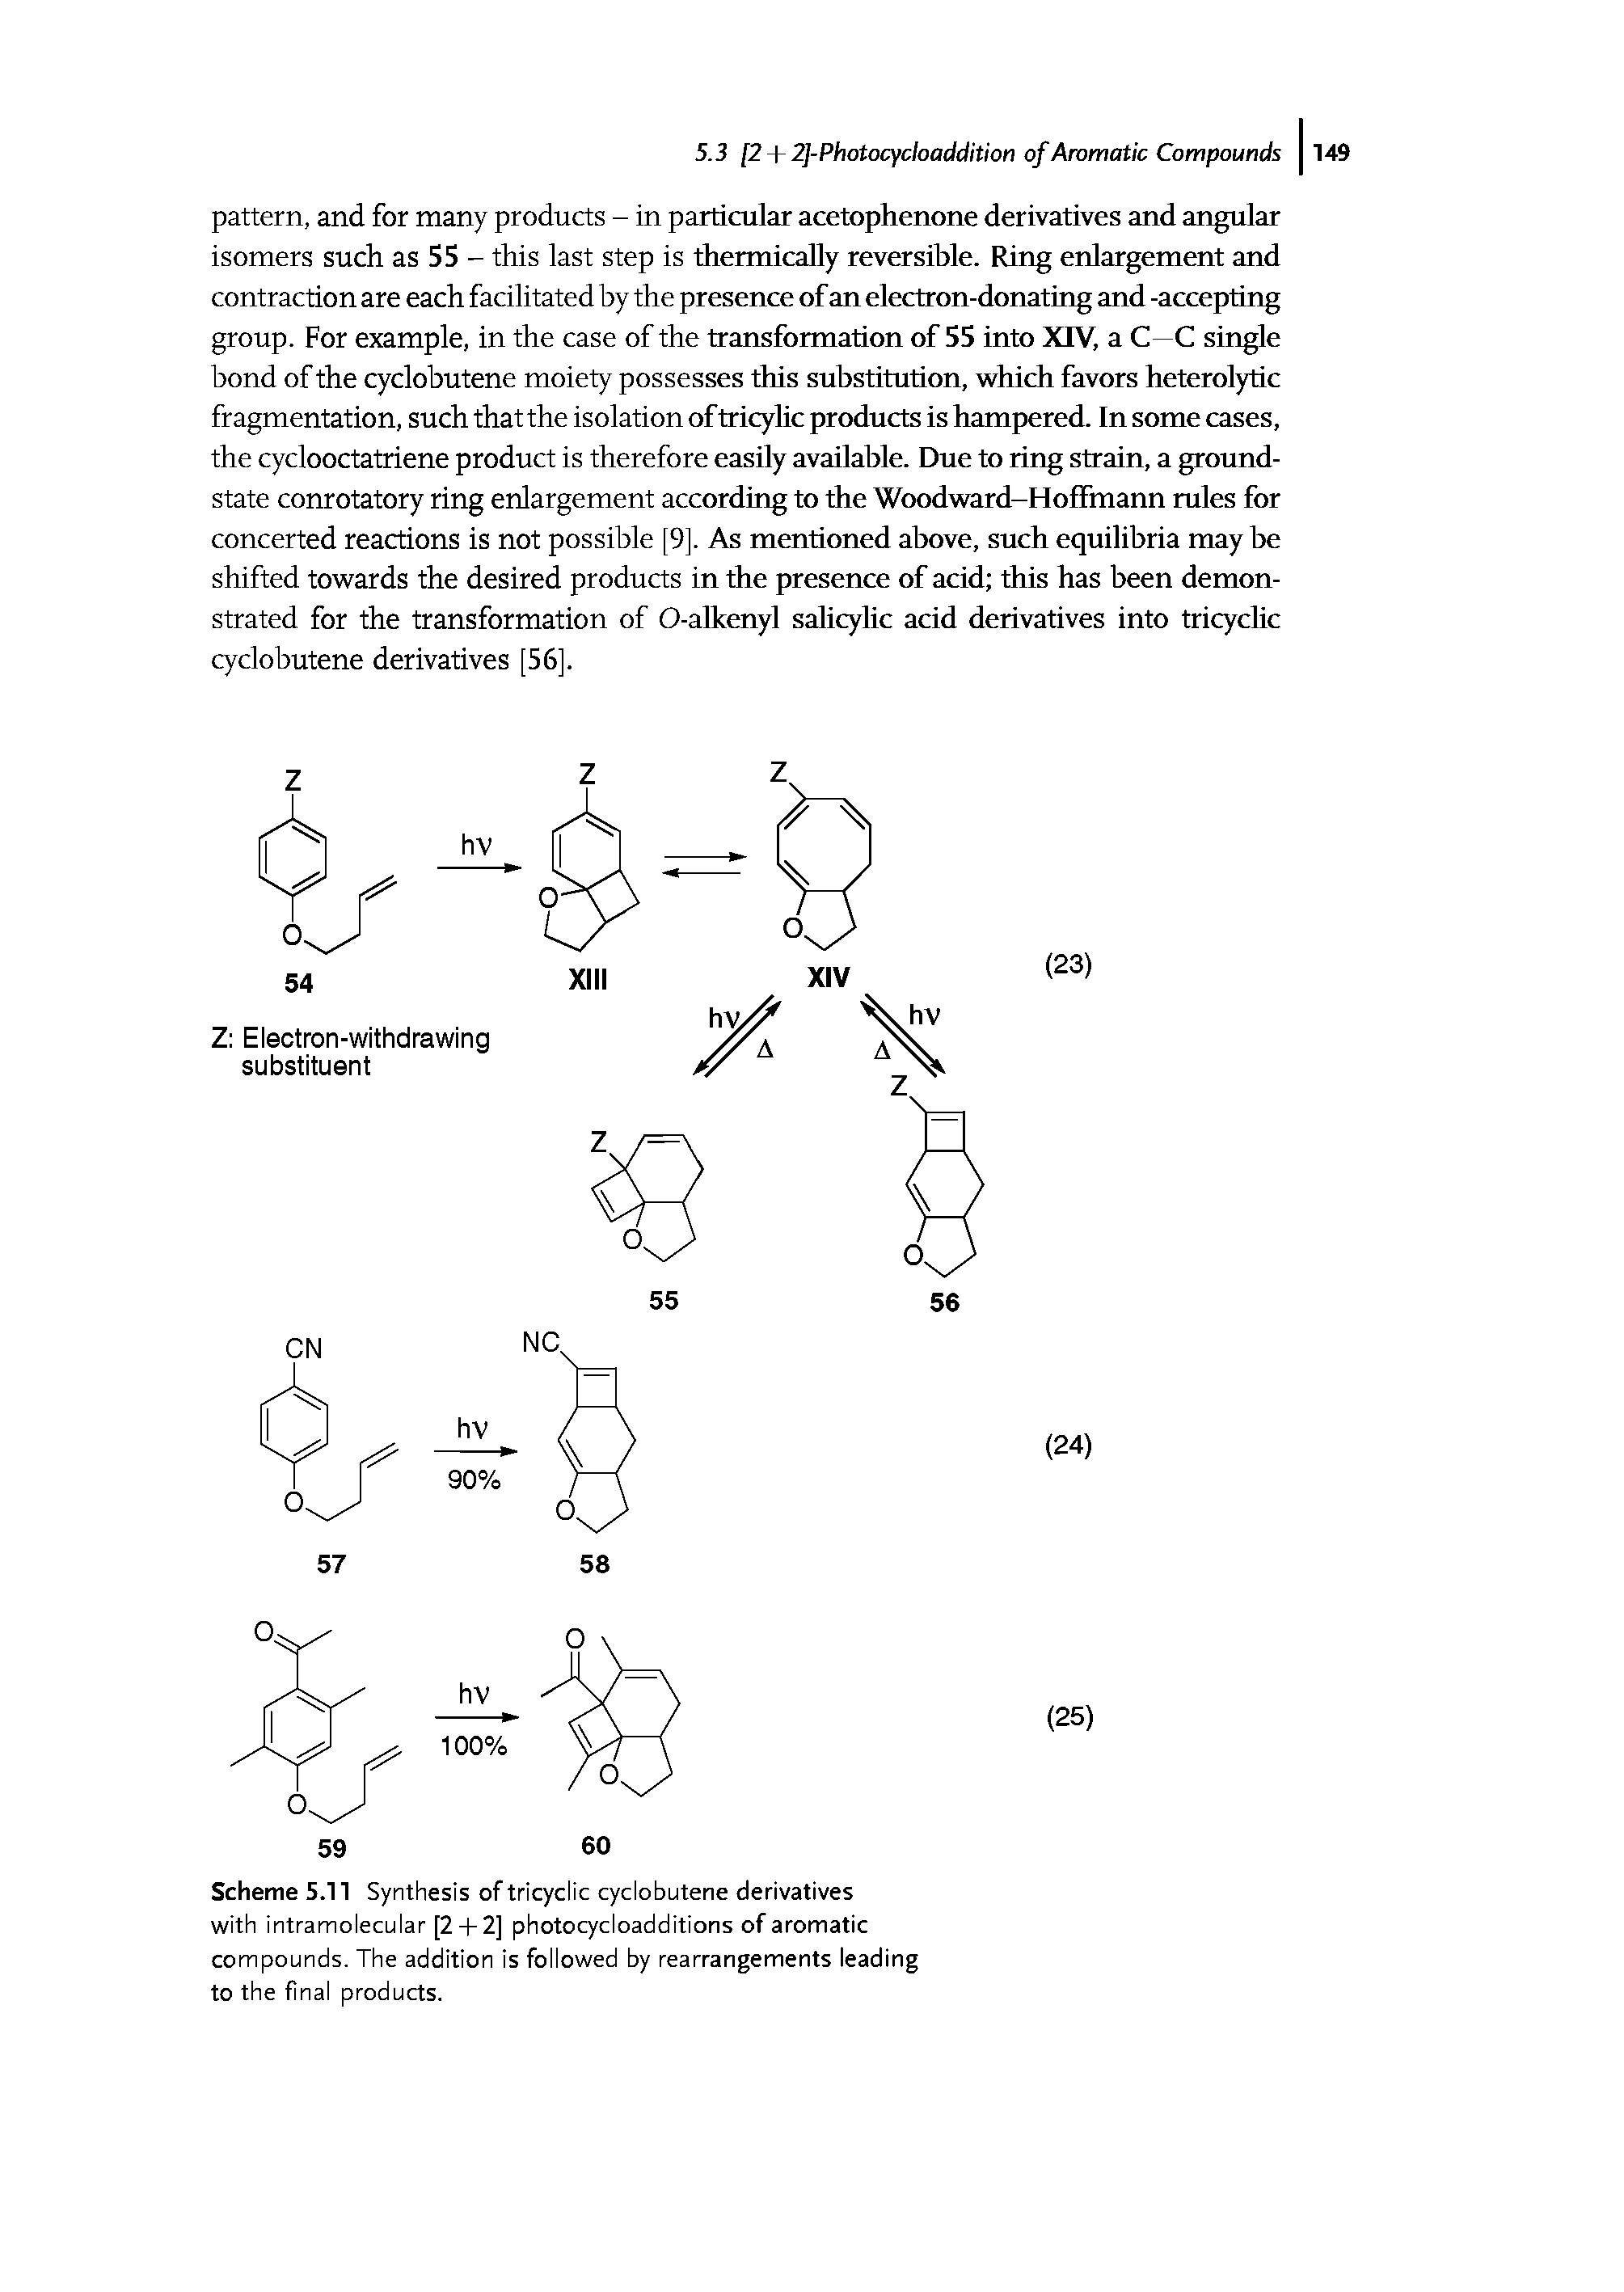 Scheme 5.11 Synthesis of tricyclic cyclo butene derivatives with intramolecular [2 + 2] photocycloadditions of aromatic compounds. The addition is followed by rearrangements leading to the final products.